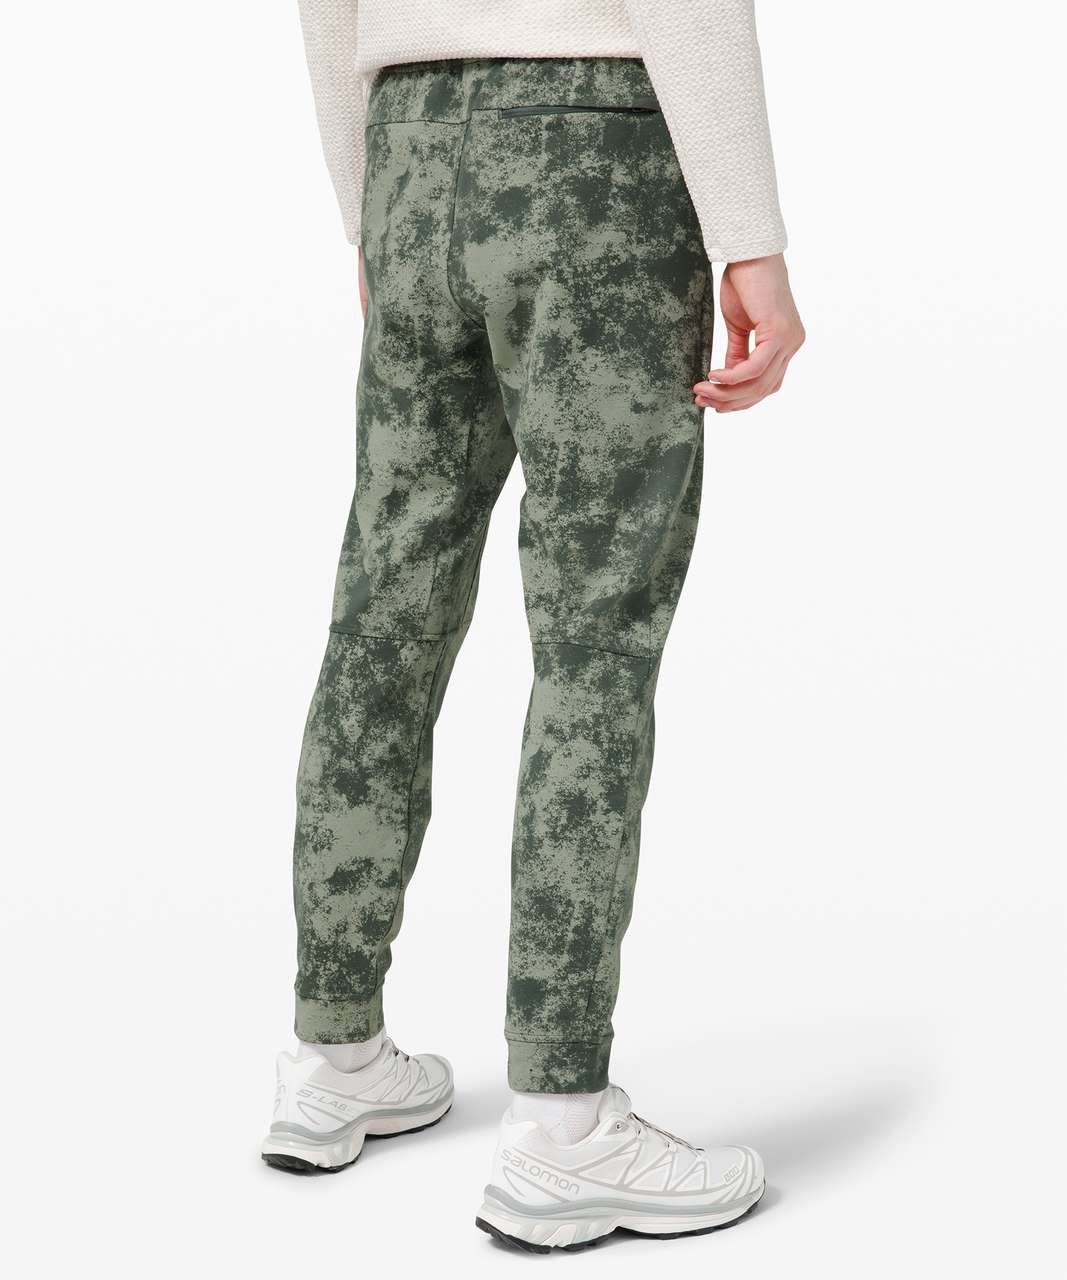 Lululemon City Sweat Jogger 29" *French Terry - Astral Smoked Spruce Green Fern